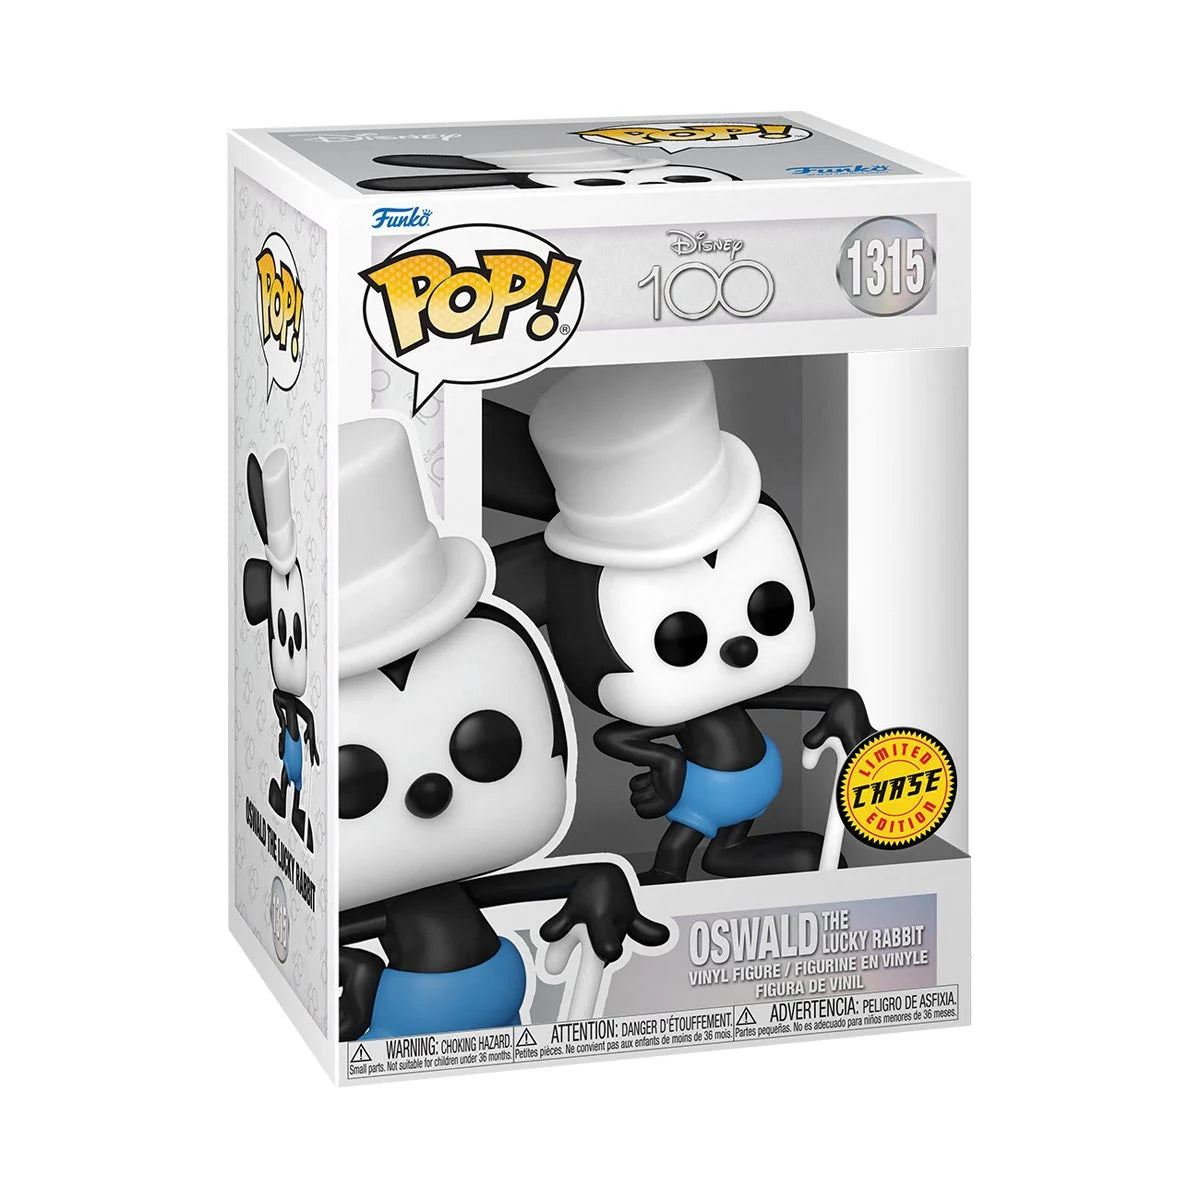 Oswald the Lucky Rabbit Funko Pop! Vinyl Figure Disney 100 with Chance of Chase!